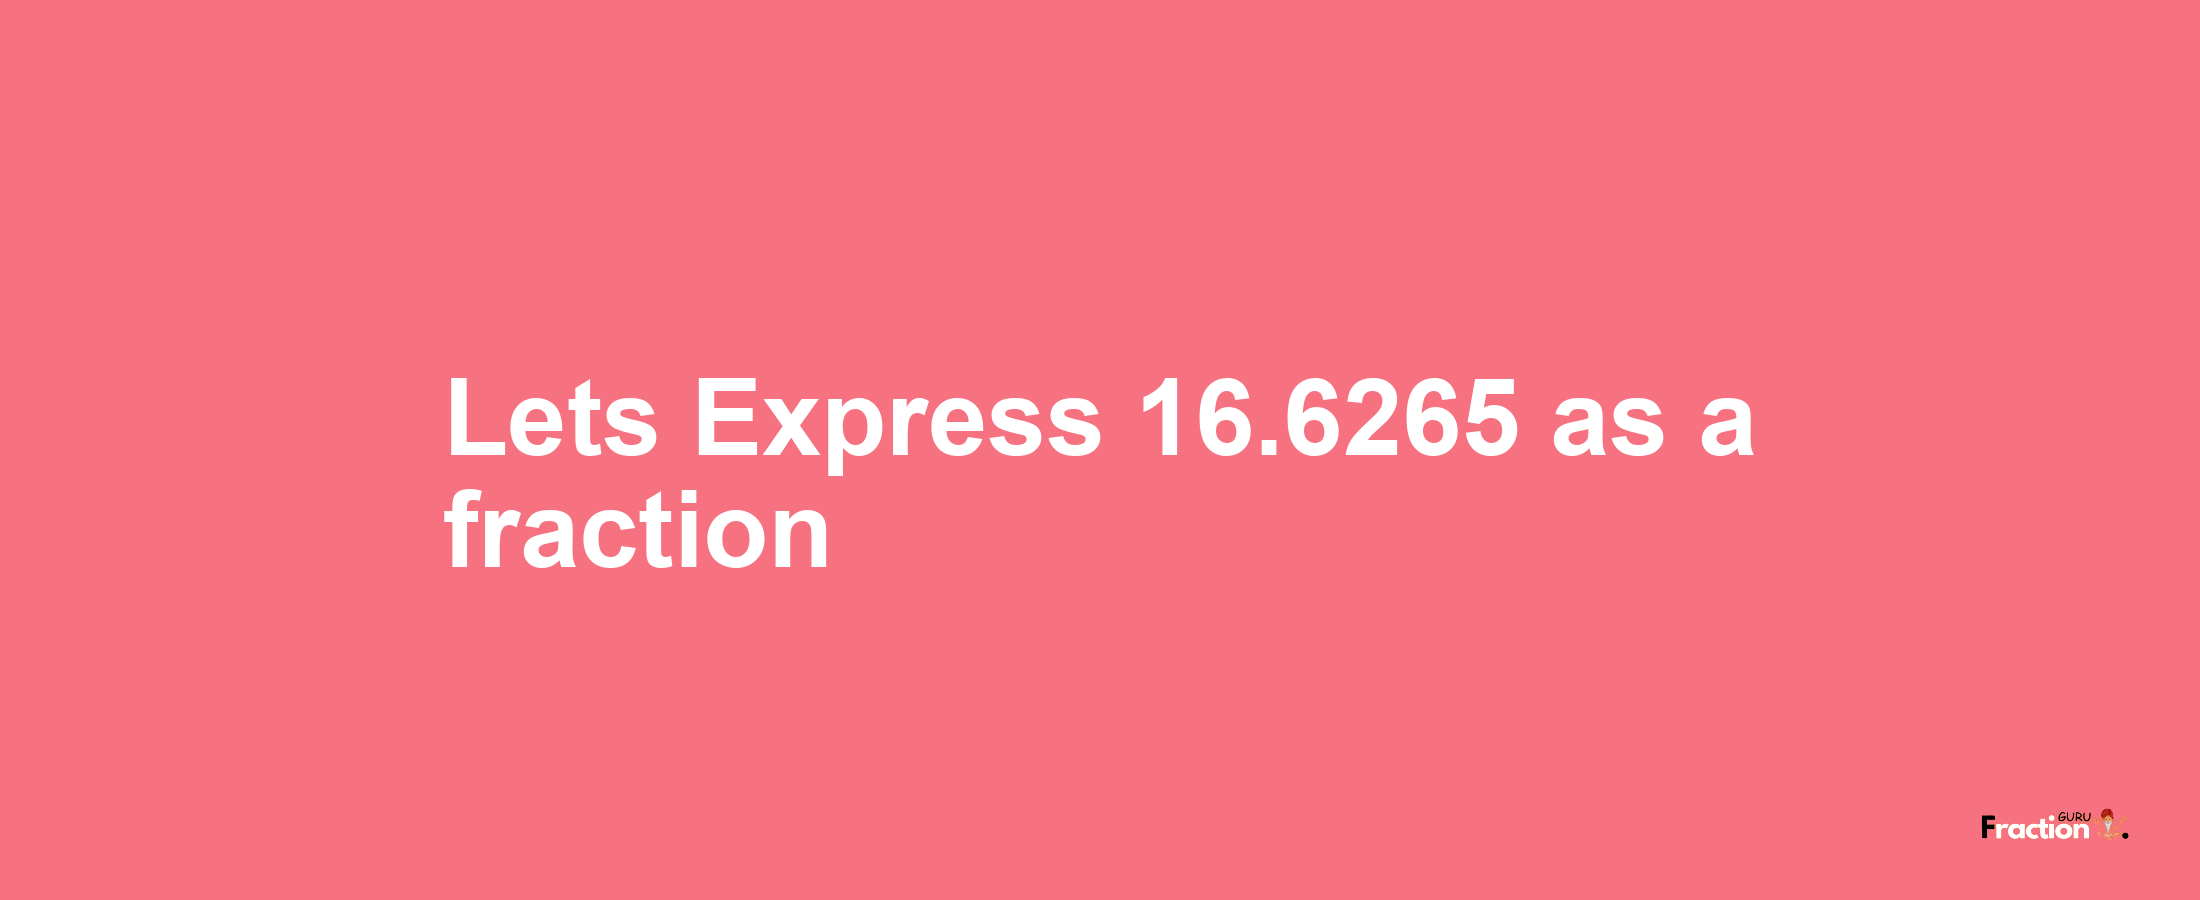 Lets Express 16.6265 as afraction